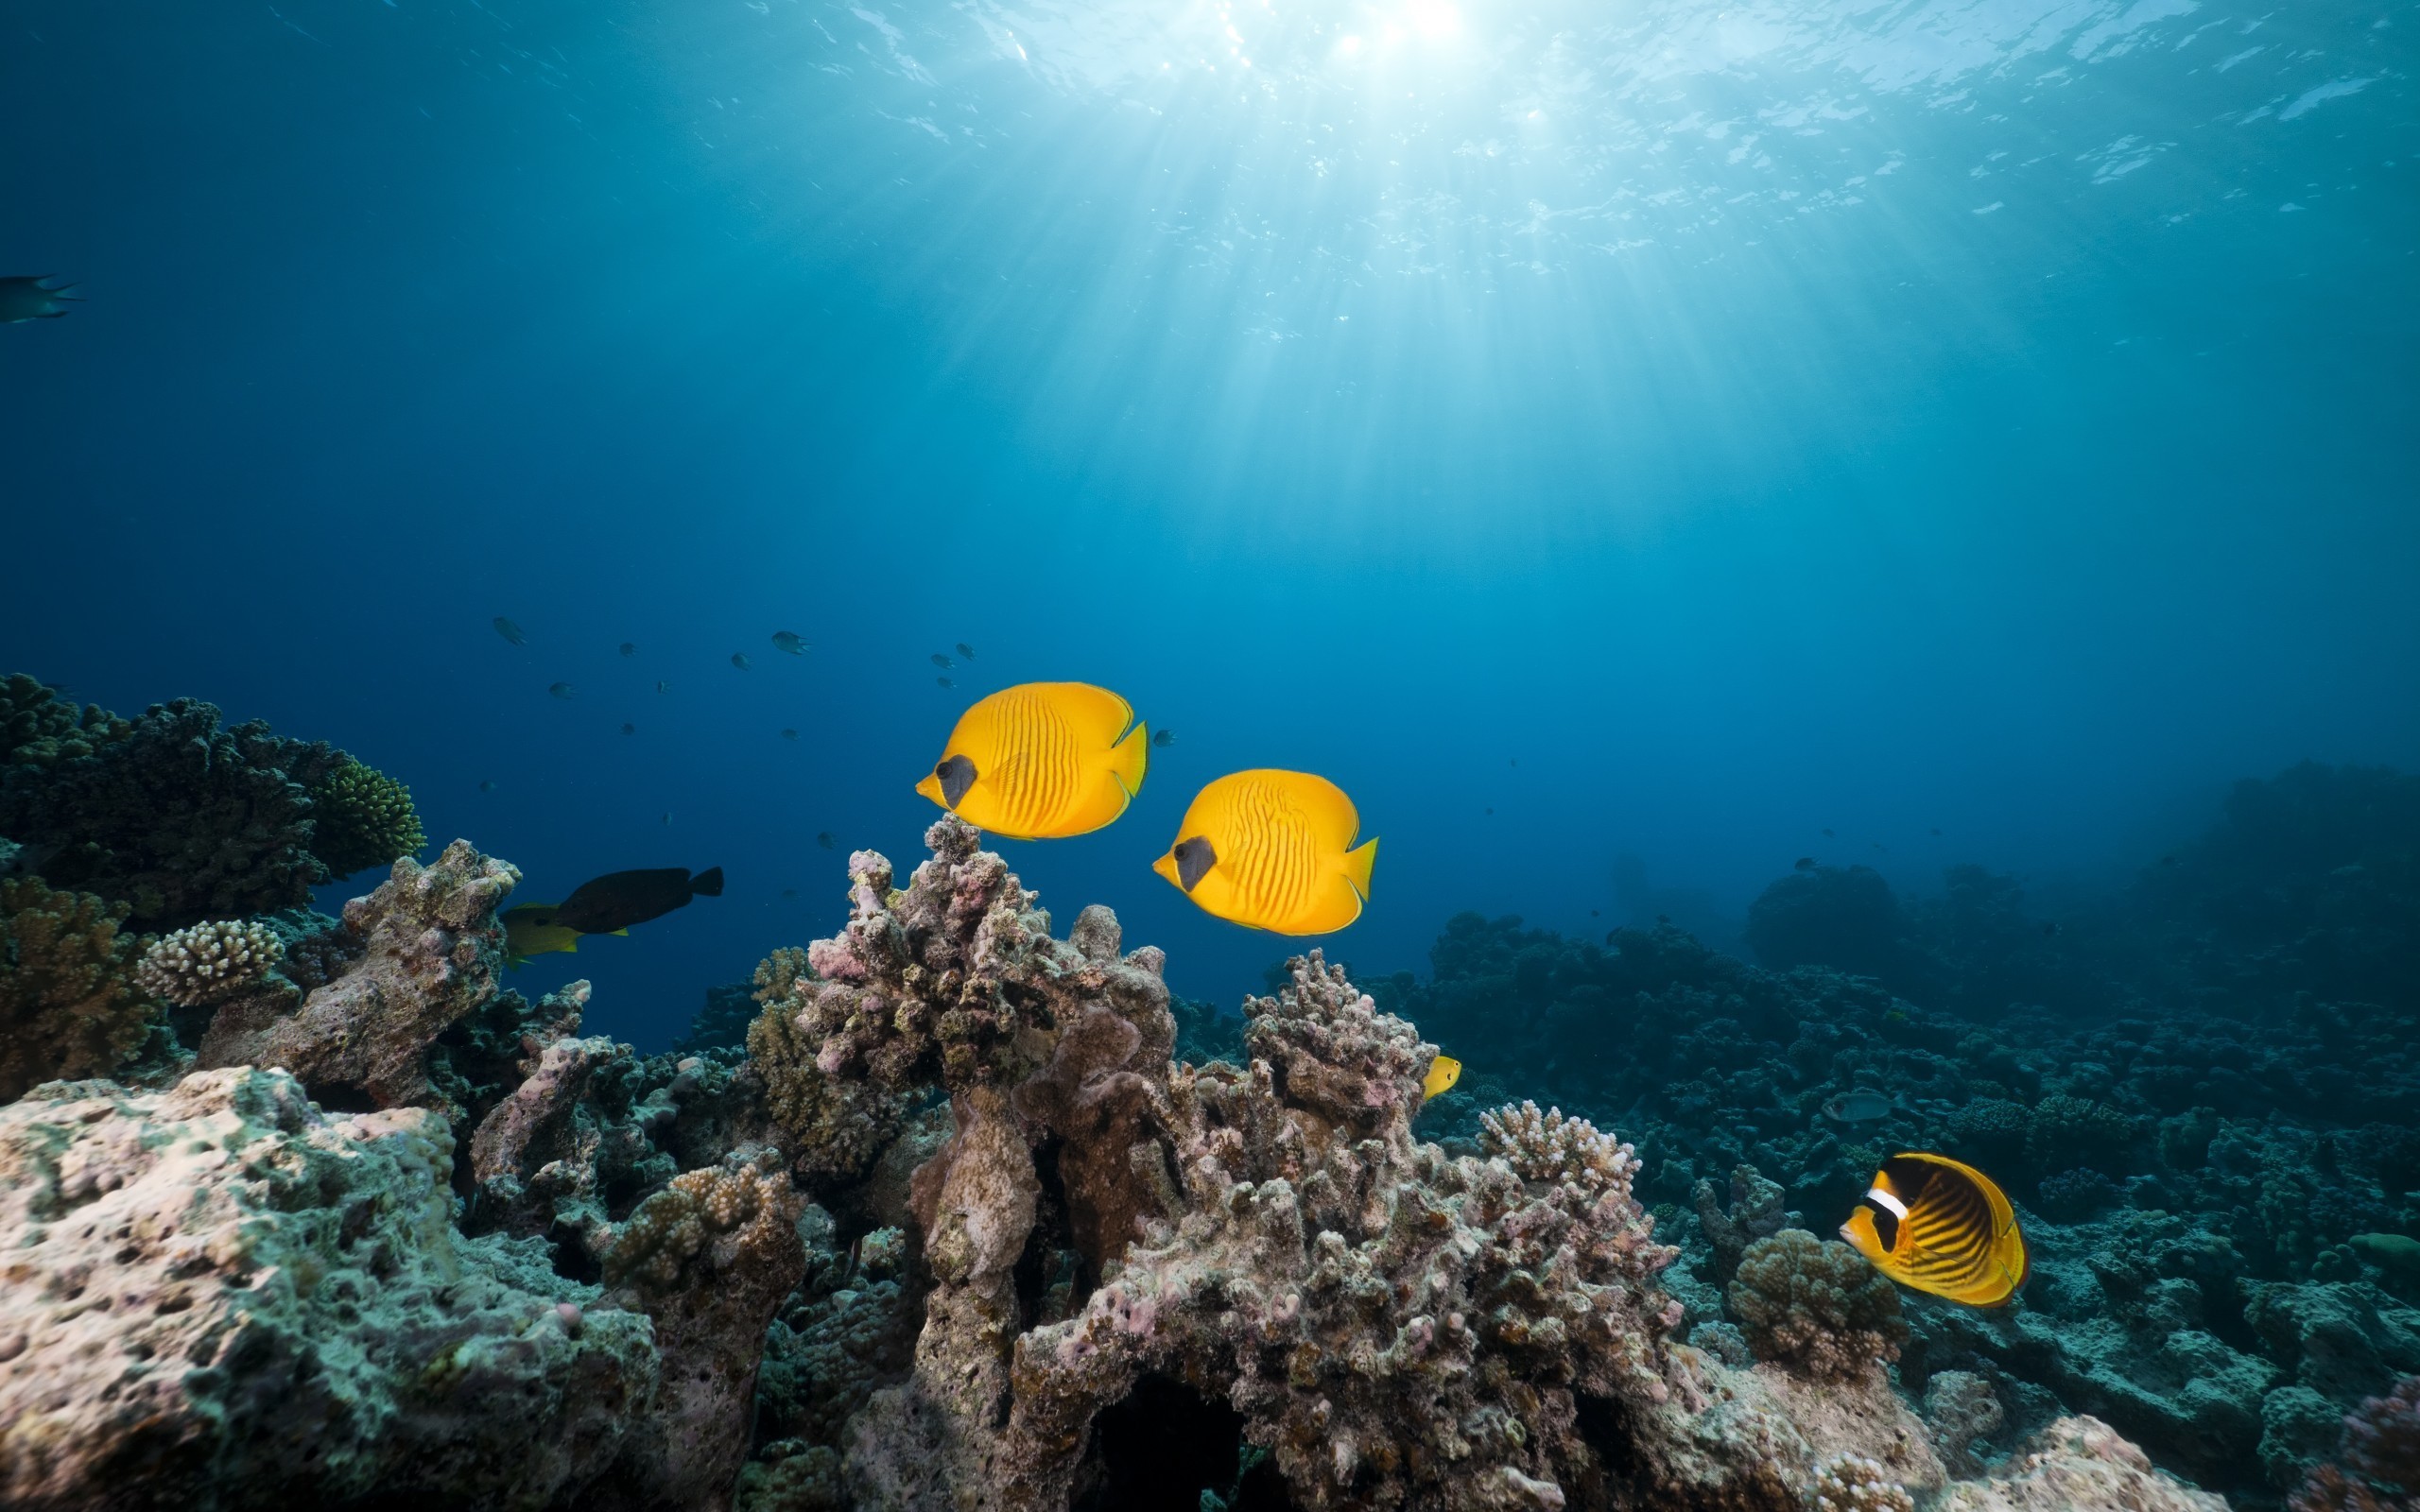 General 2560x1600 nature photography sea water underwater tropical fish coral sunlight animals fish sea life